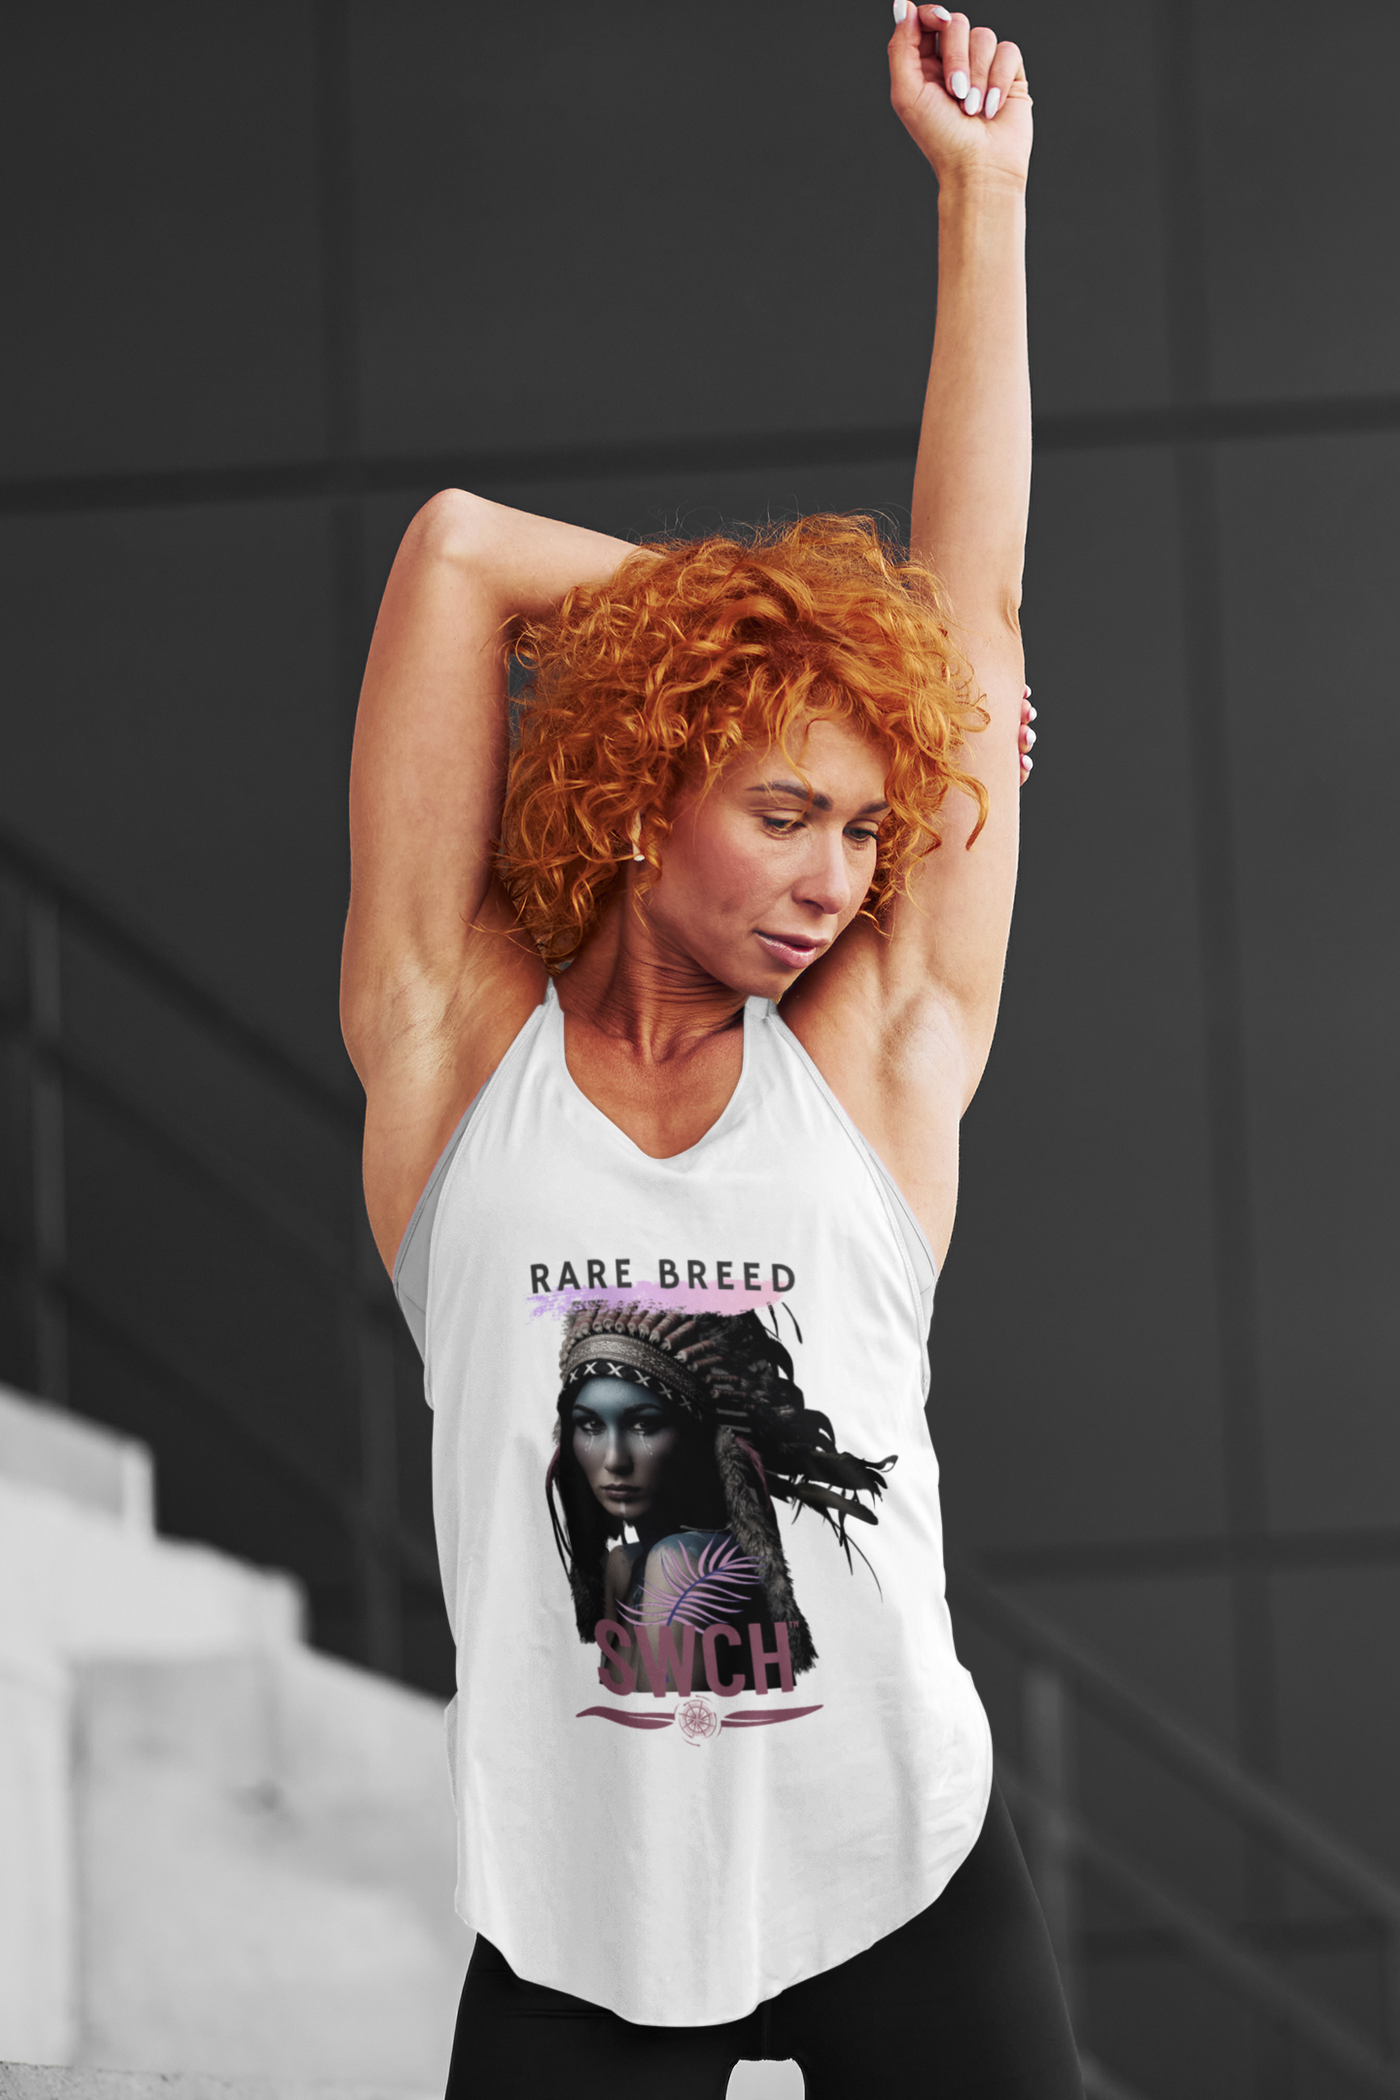 Get trendy with Women's Racerback Rare Breed Tank -  available at SWCH Store. Grab yours for £18 today!